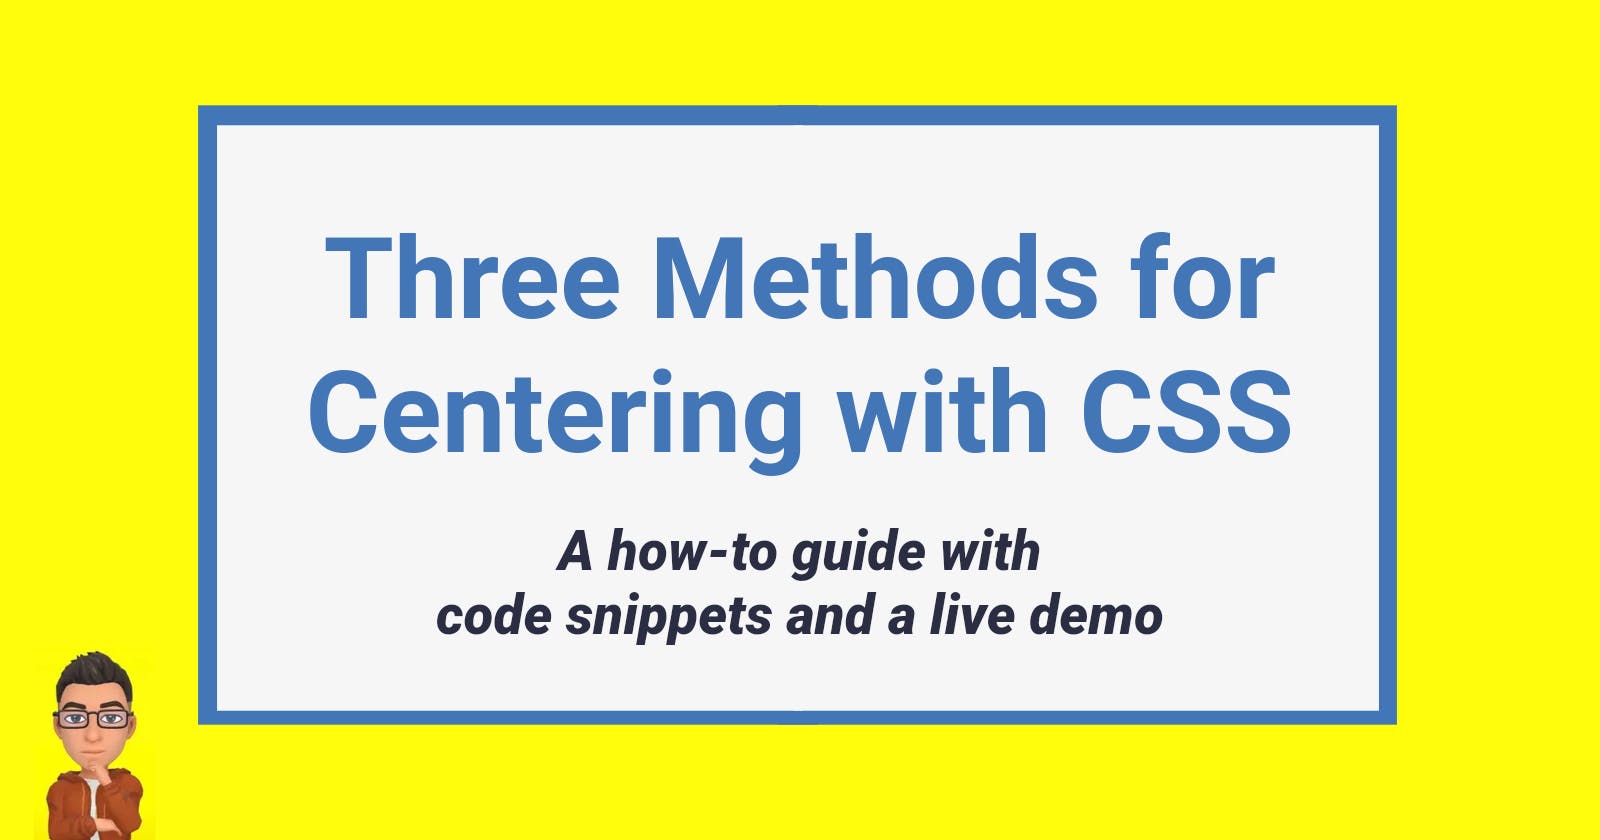 How-to: Three Methods for Centering Elements with CSS